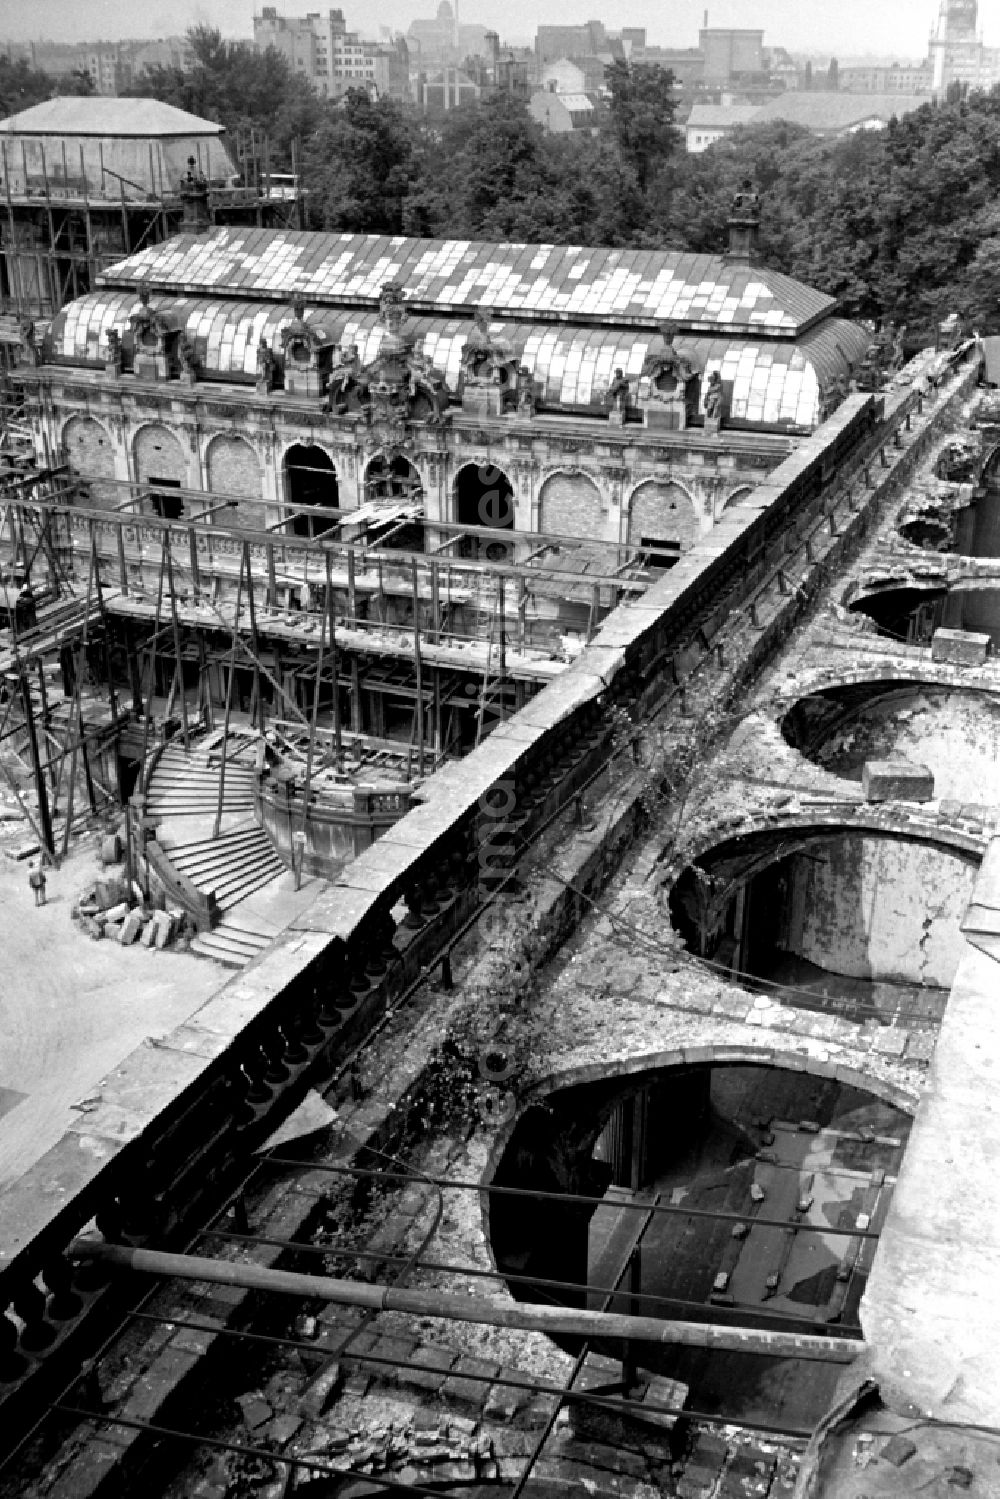 Dresden: Construction site for the reconstruction of the war-damaged ruins of the Dresden Zwinger on Theaterplatz - Sophienstrasse in the Altstadt district of Dresden in the state of Saxony on the territory of the former GDR, German Democratic Republic